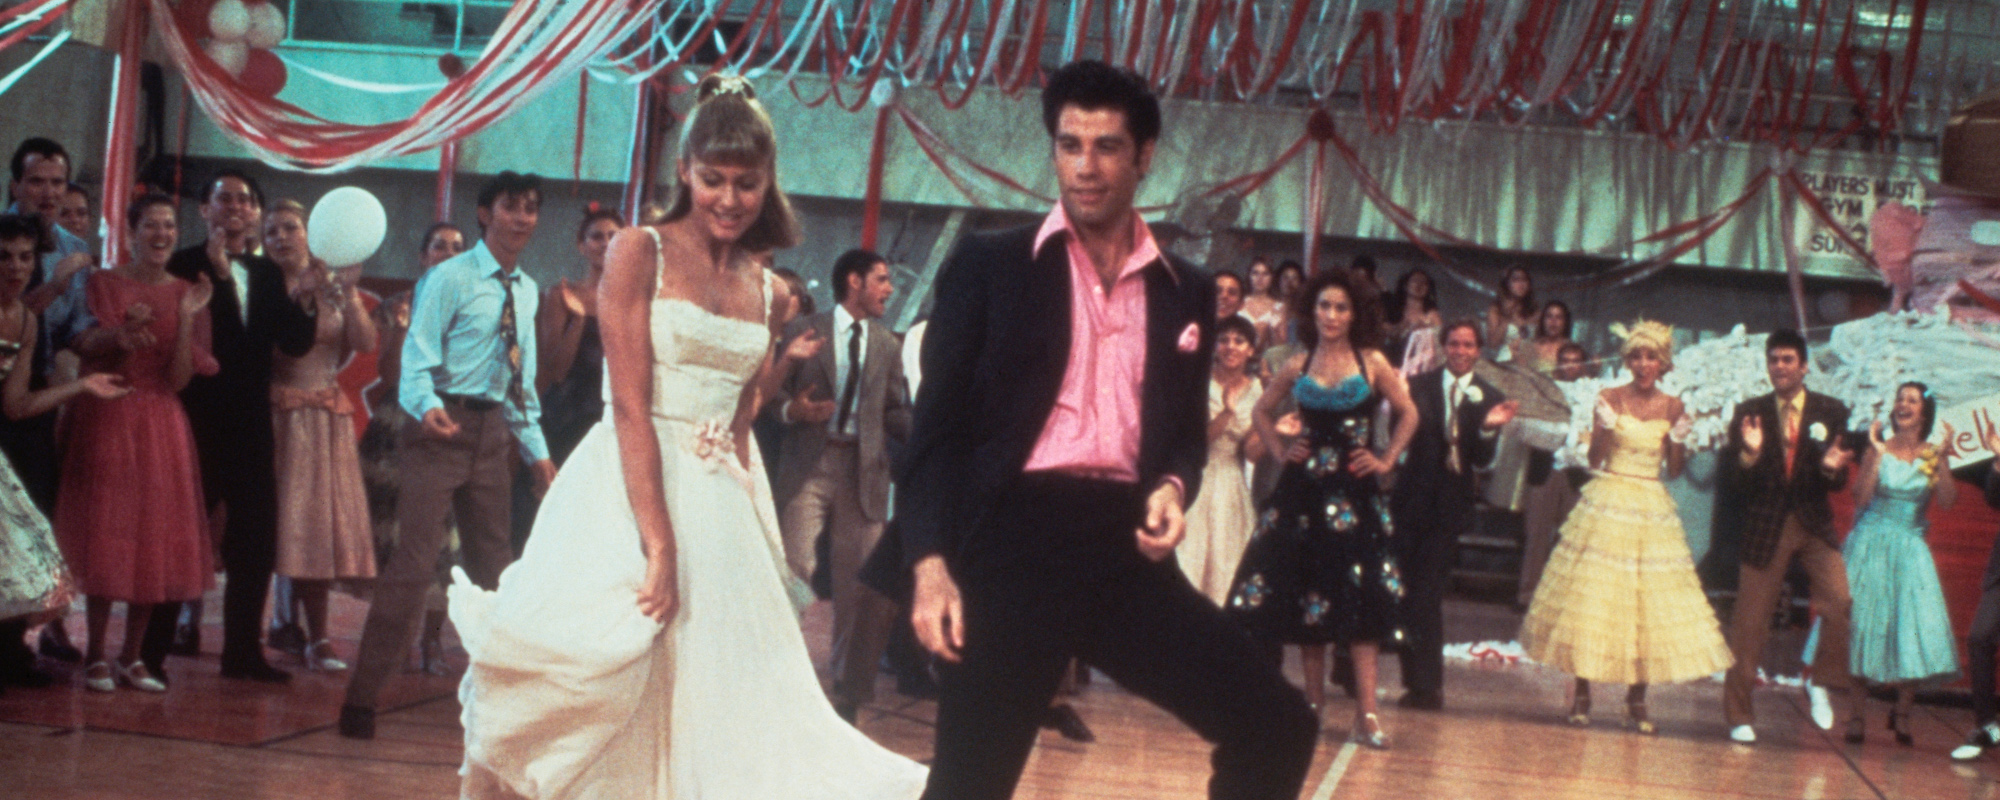 The 5 Best Musical Movies of All Time